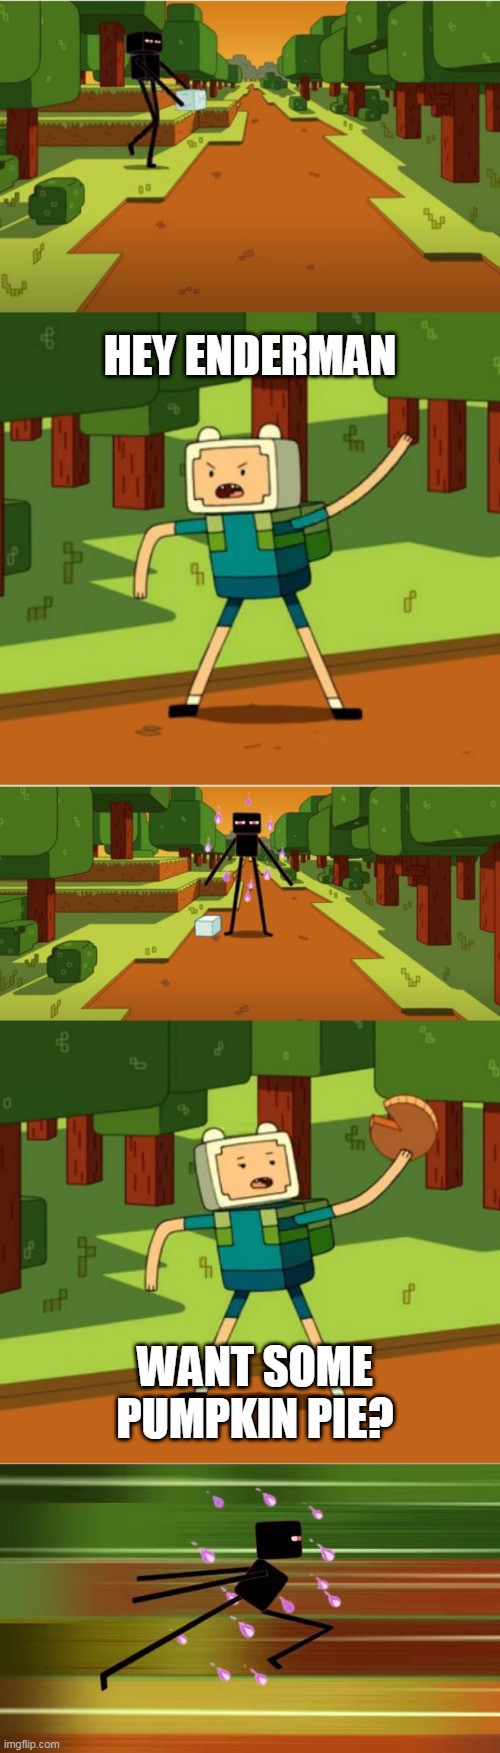 HE WANTS THE REST | HEY ENDERMAN; WANT SOME PUMPKIN PIE? | image tagged in memes,adventure time,enderman,finn the human,minecraft | made w/ Imgflip meme maker